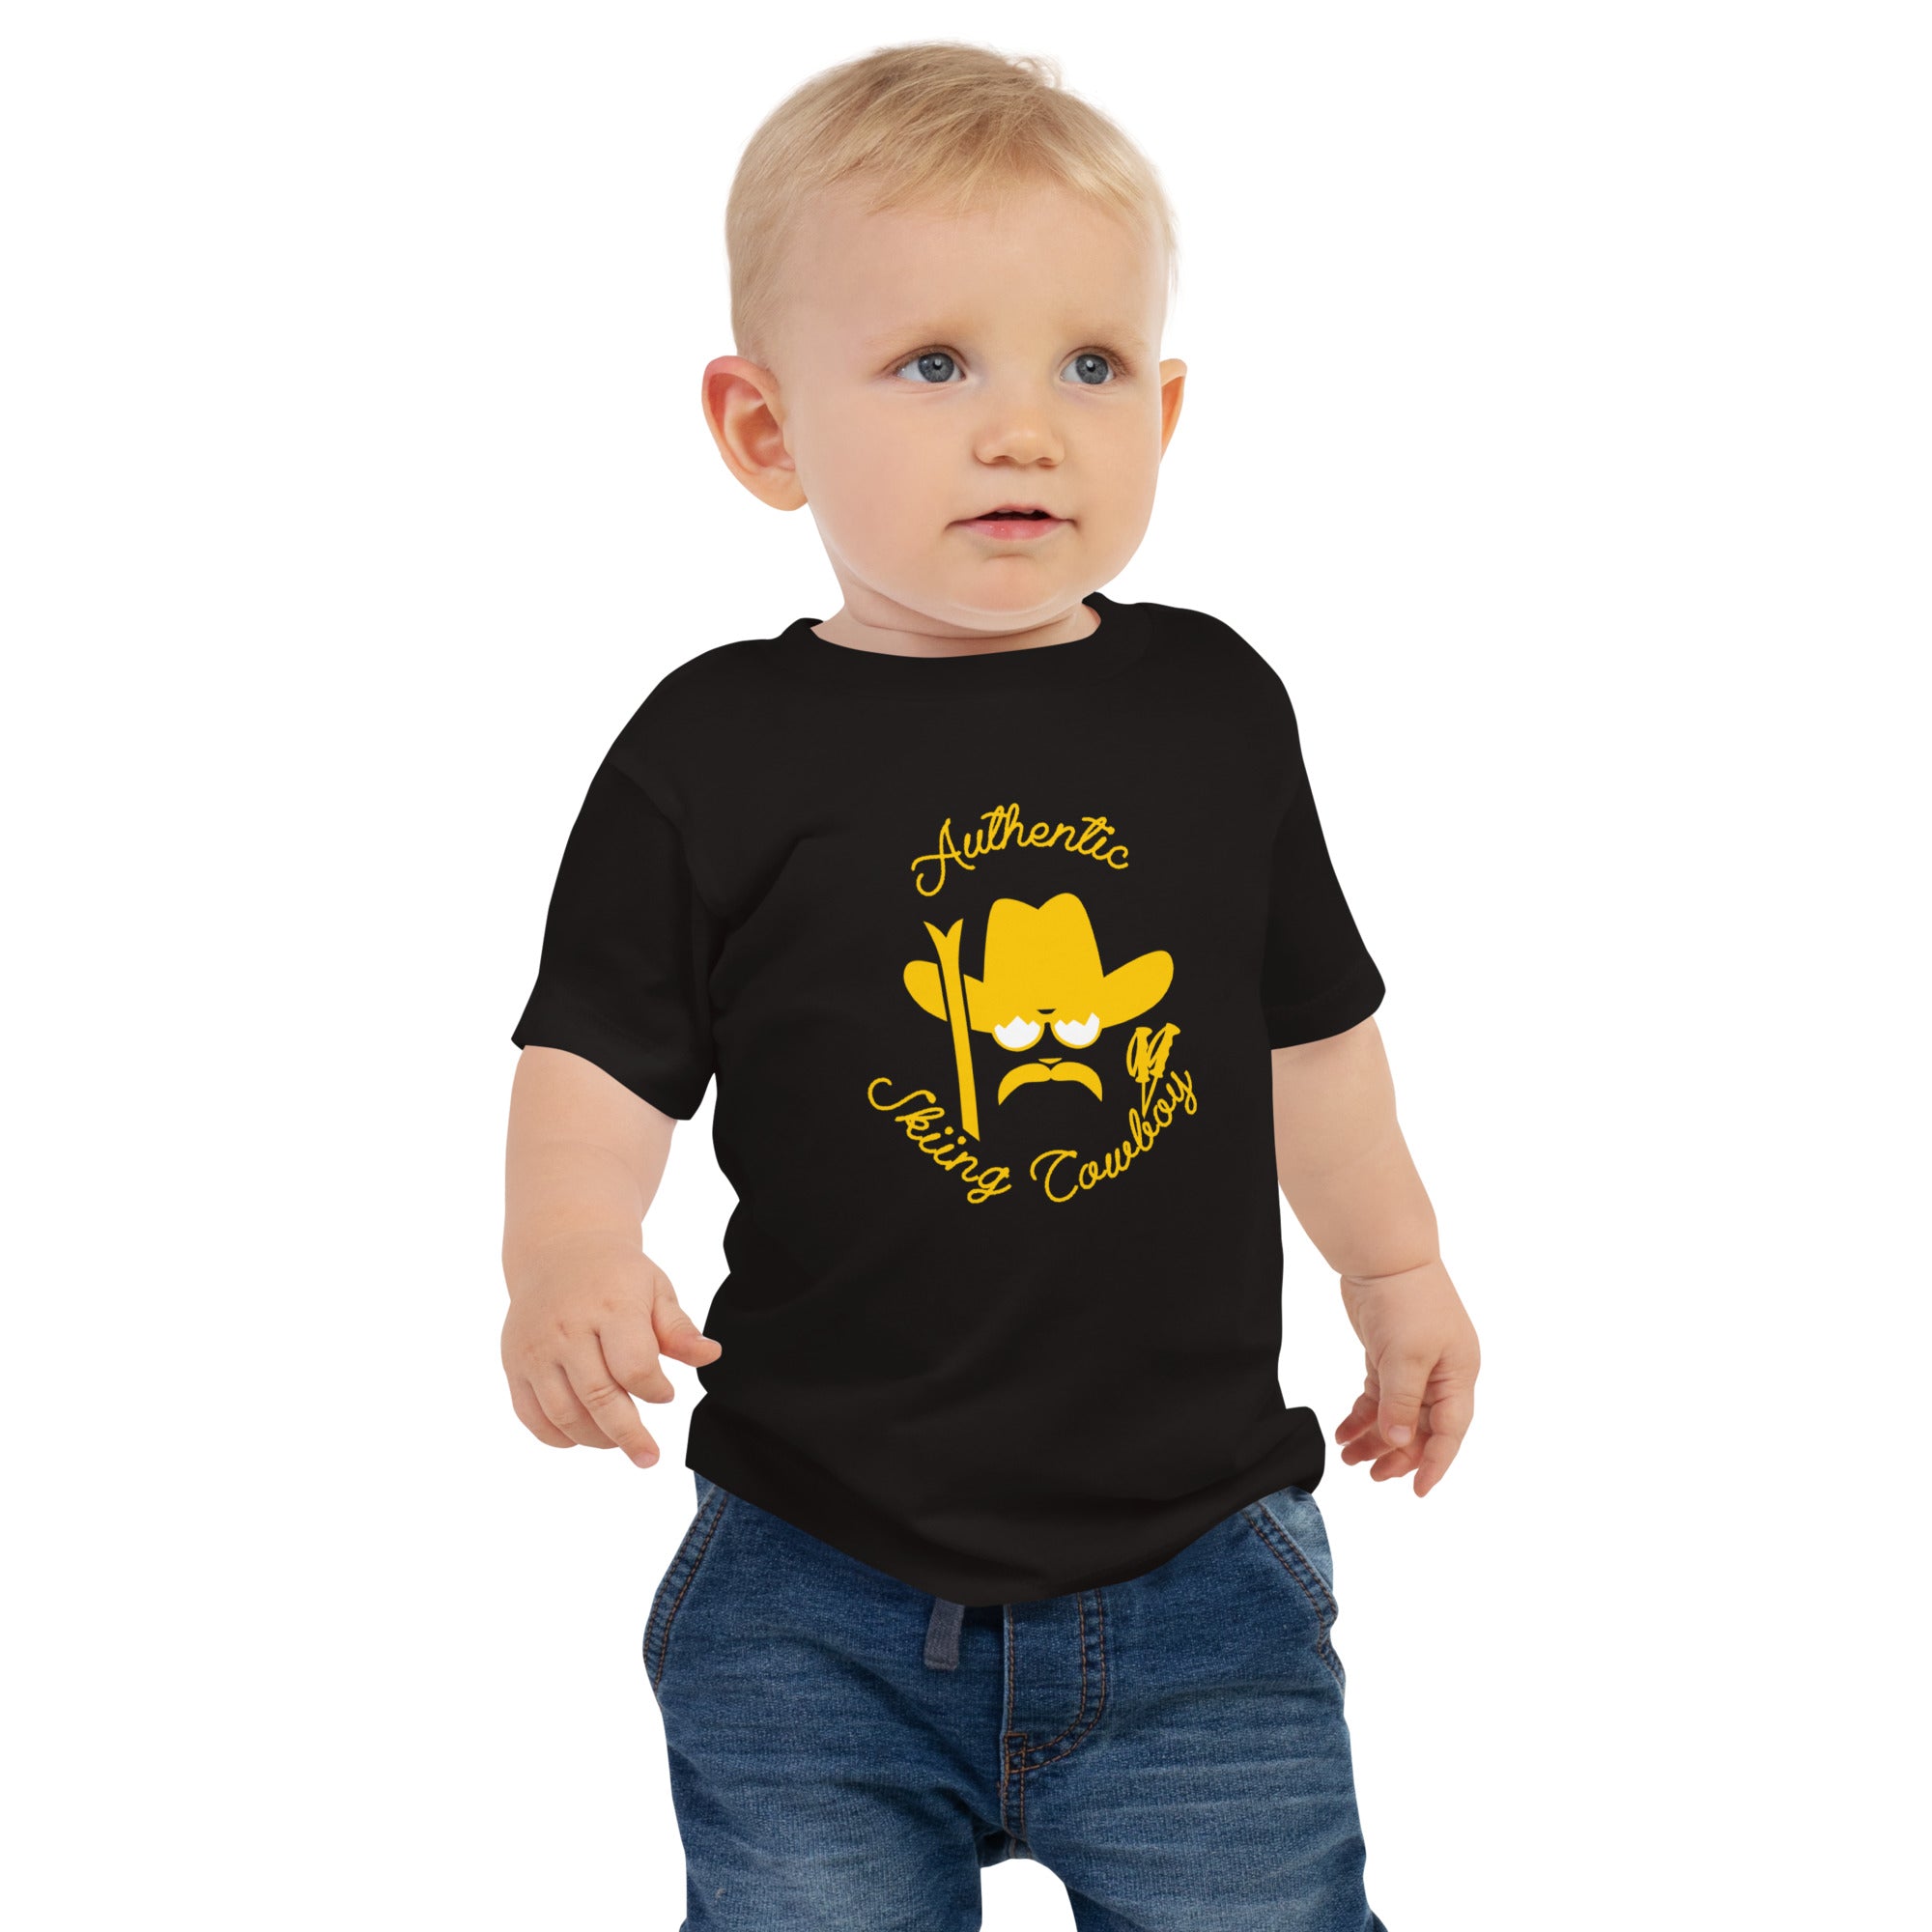 Baby T-shirt Authentic Skiing Cowboy Gold